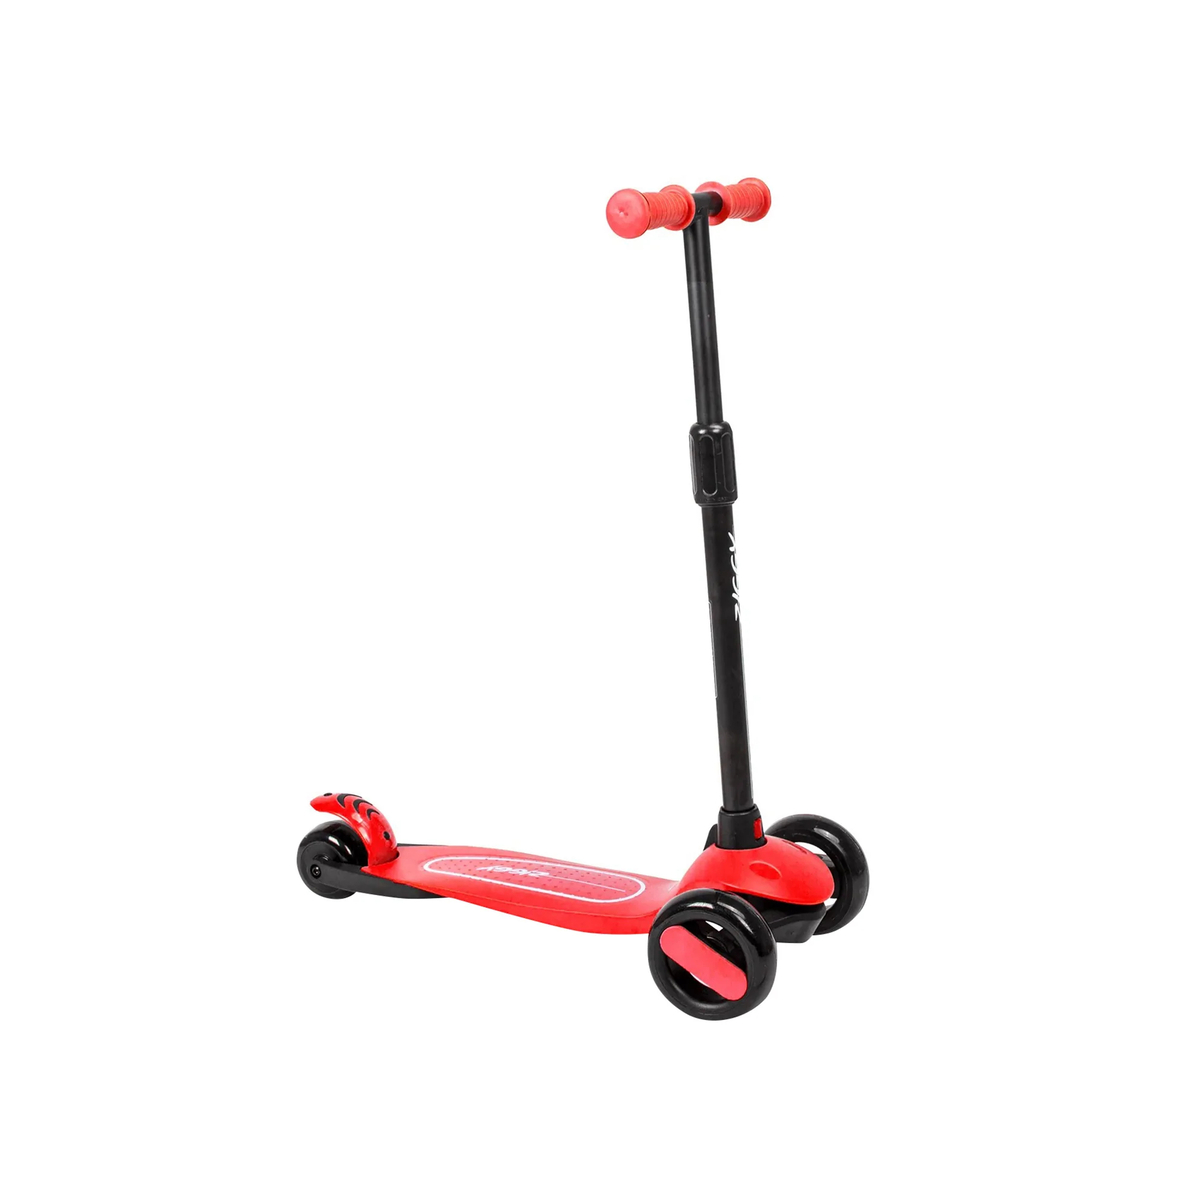 Spartan 3-Wheel Kick Scooter, Red, 7036